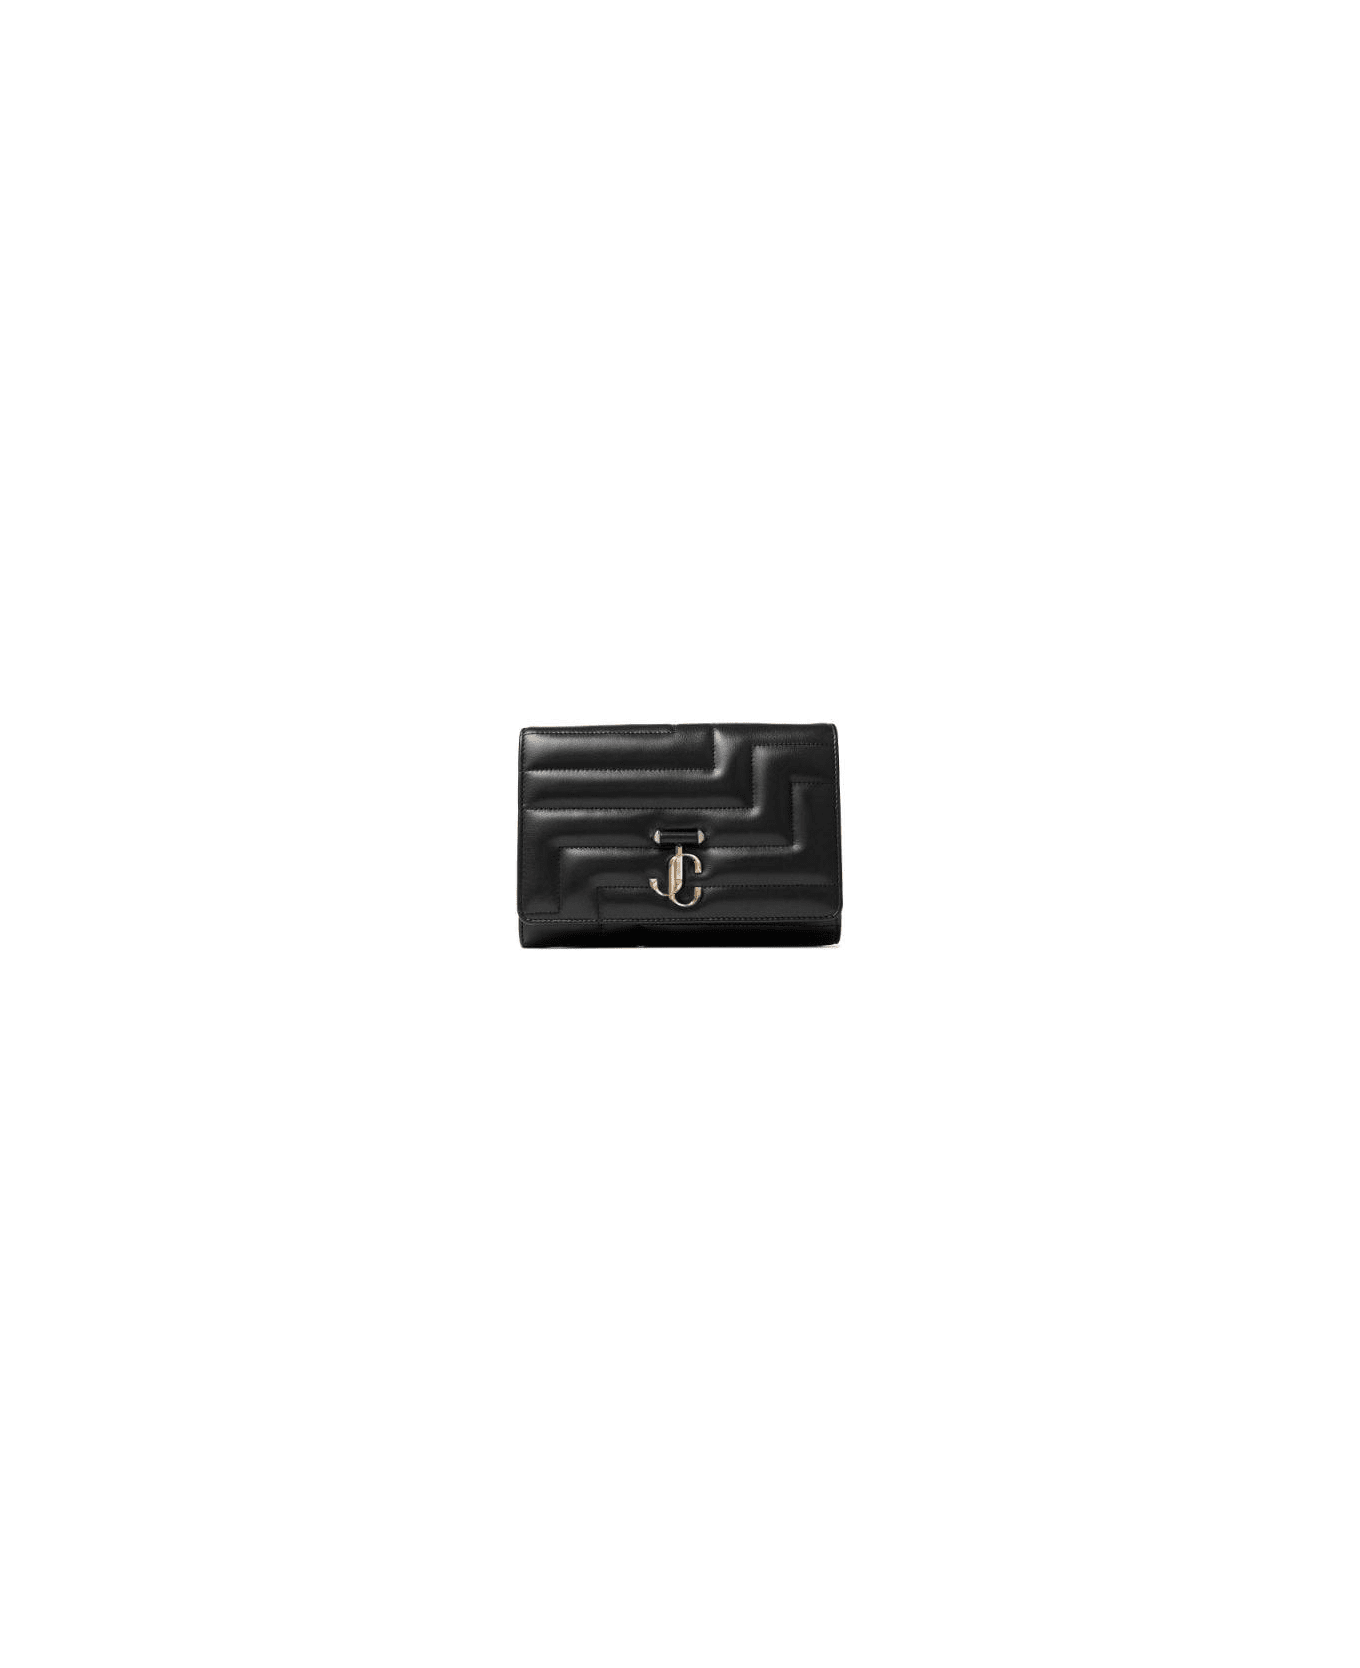 Jimmy Choo Logo Plaque Chained Shoulder Bag - NERO クラッチバッグ